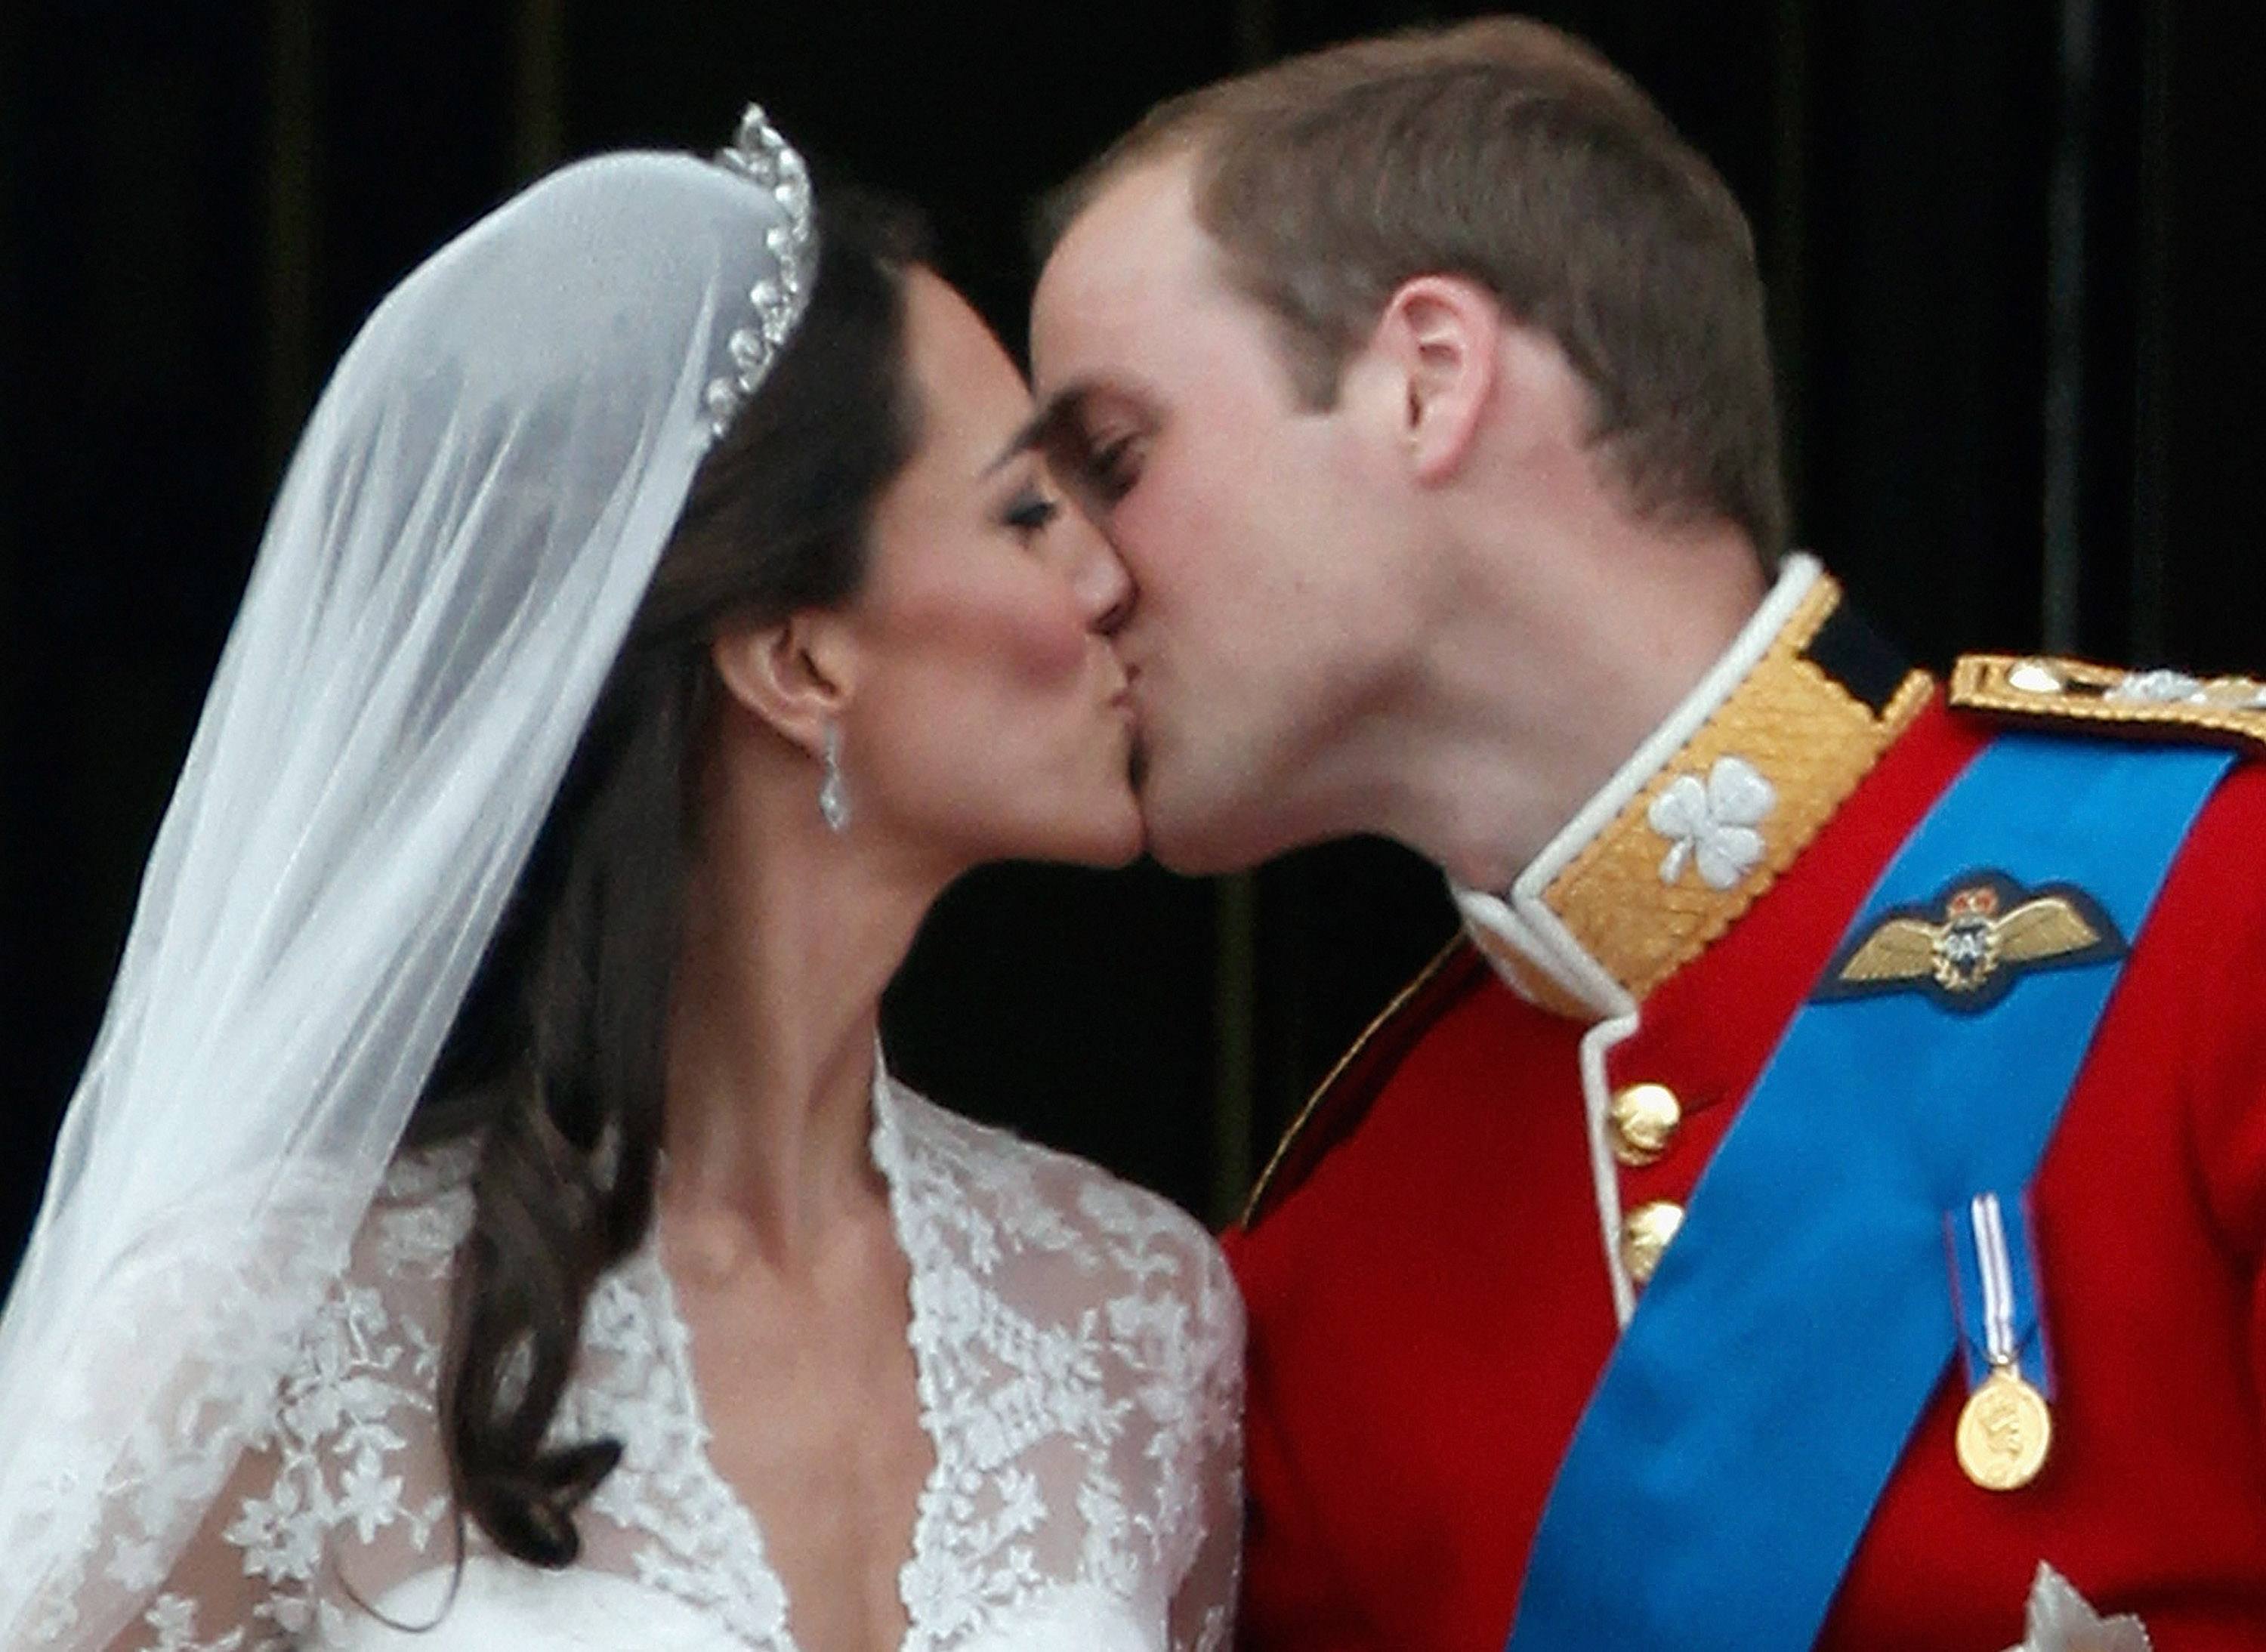 TRH Catherine, Duchess of Cambridge and Prince William, Duke of Cambridge kiss on the balcony at Buckingham Palace on April 29, 2011 in London, England.